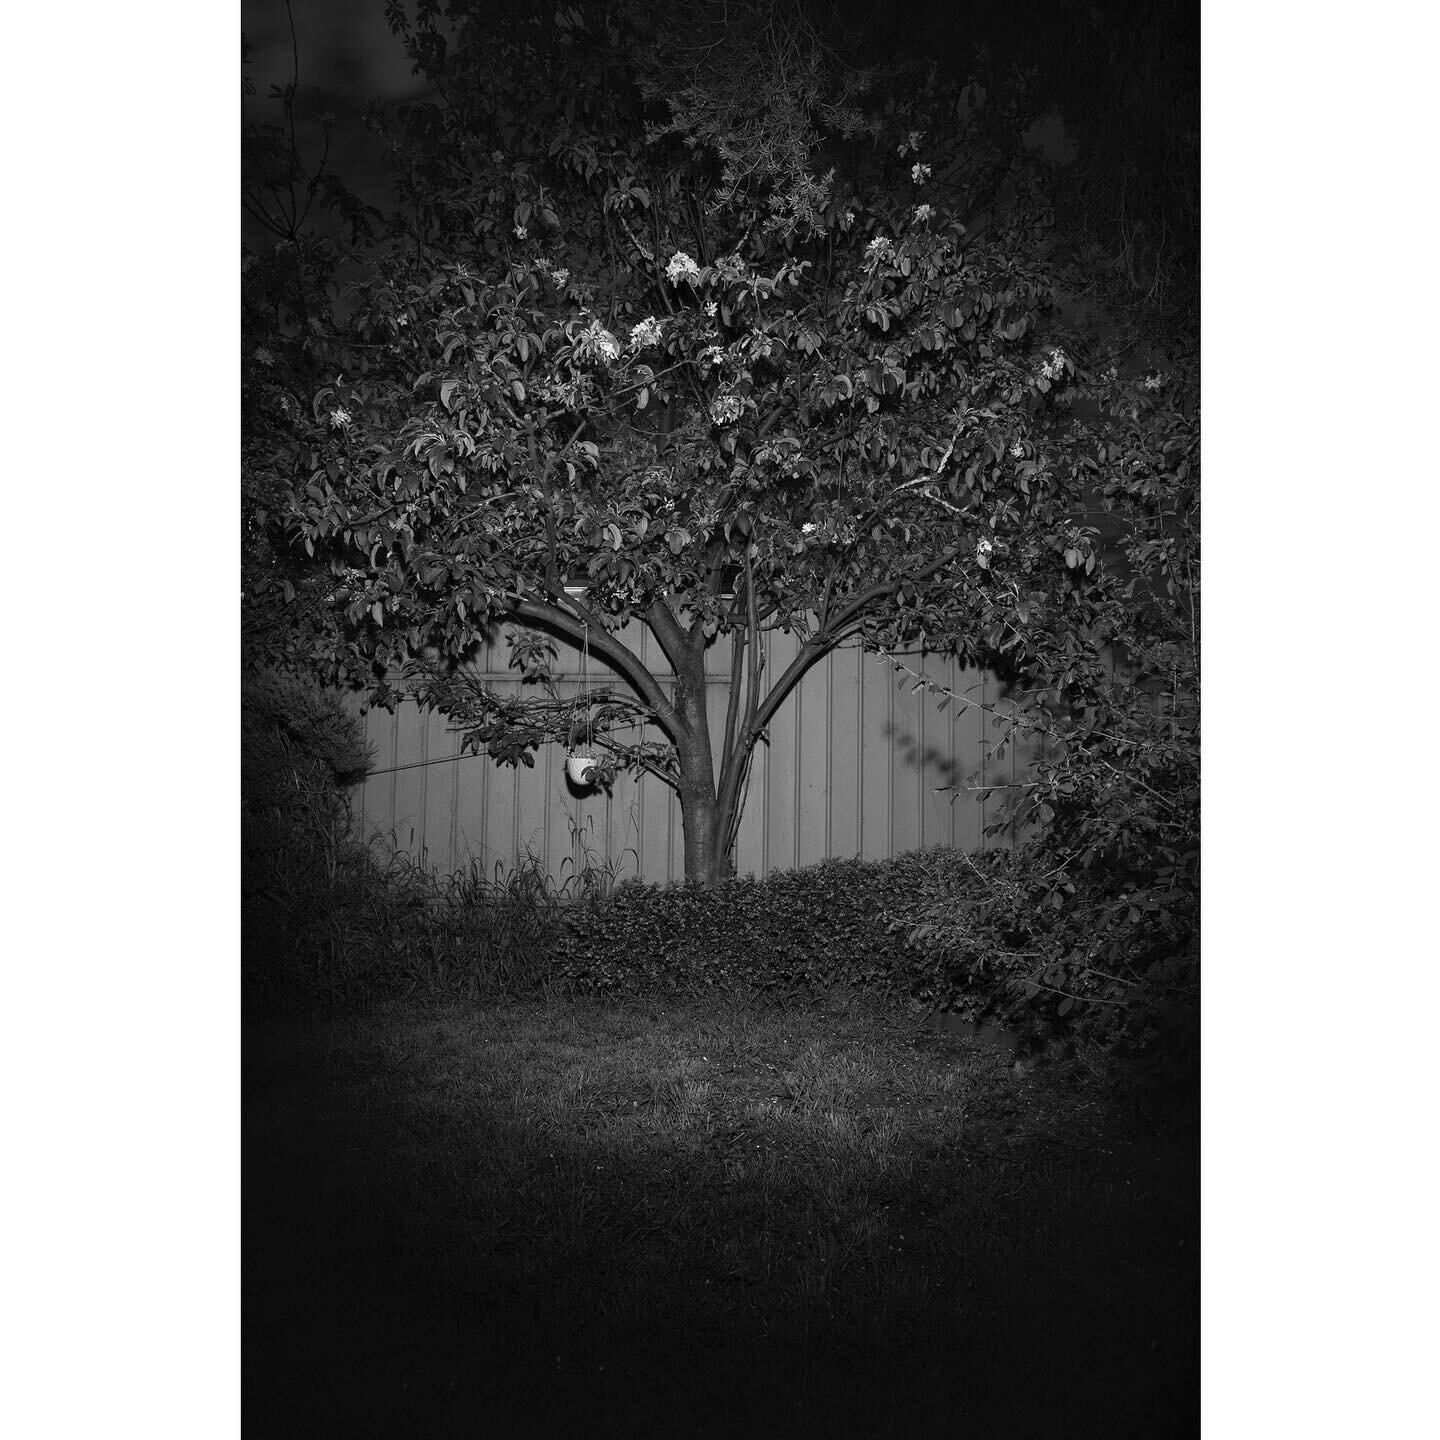 Finally getting around to posting my photo that was a semi-finalist in the Head On Photo Awards, in the Landscape category. It's called &quot;Last night of lockdown&quot; and is part of the series &quot;Together, and alone&quot; which explores the is